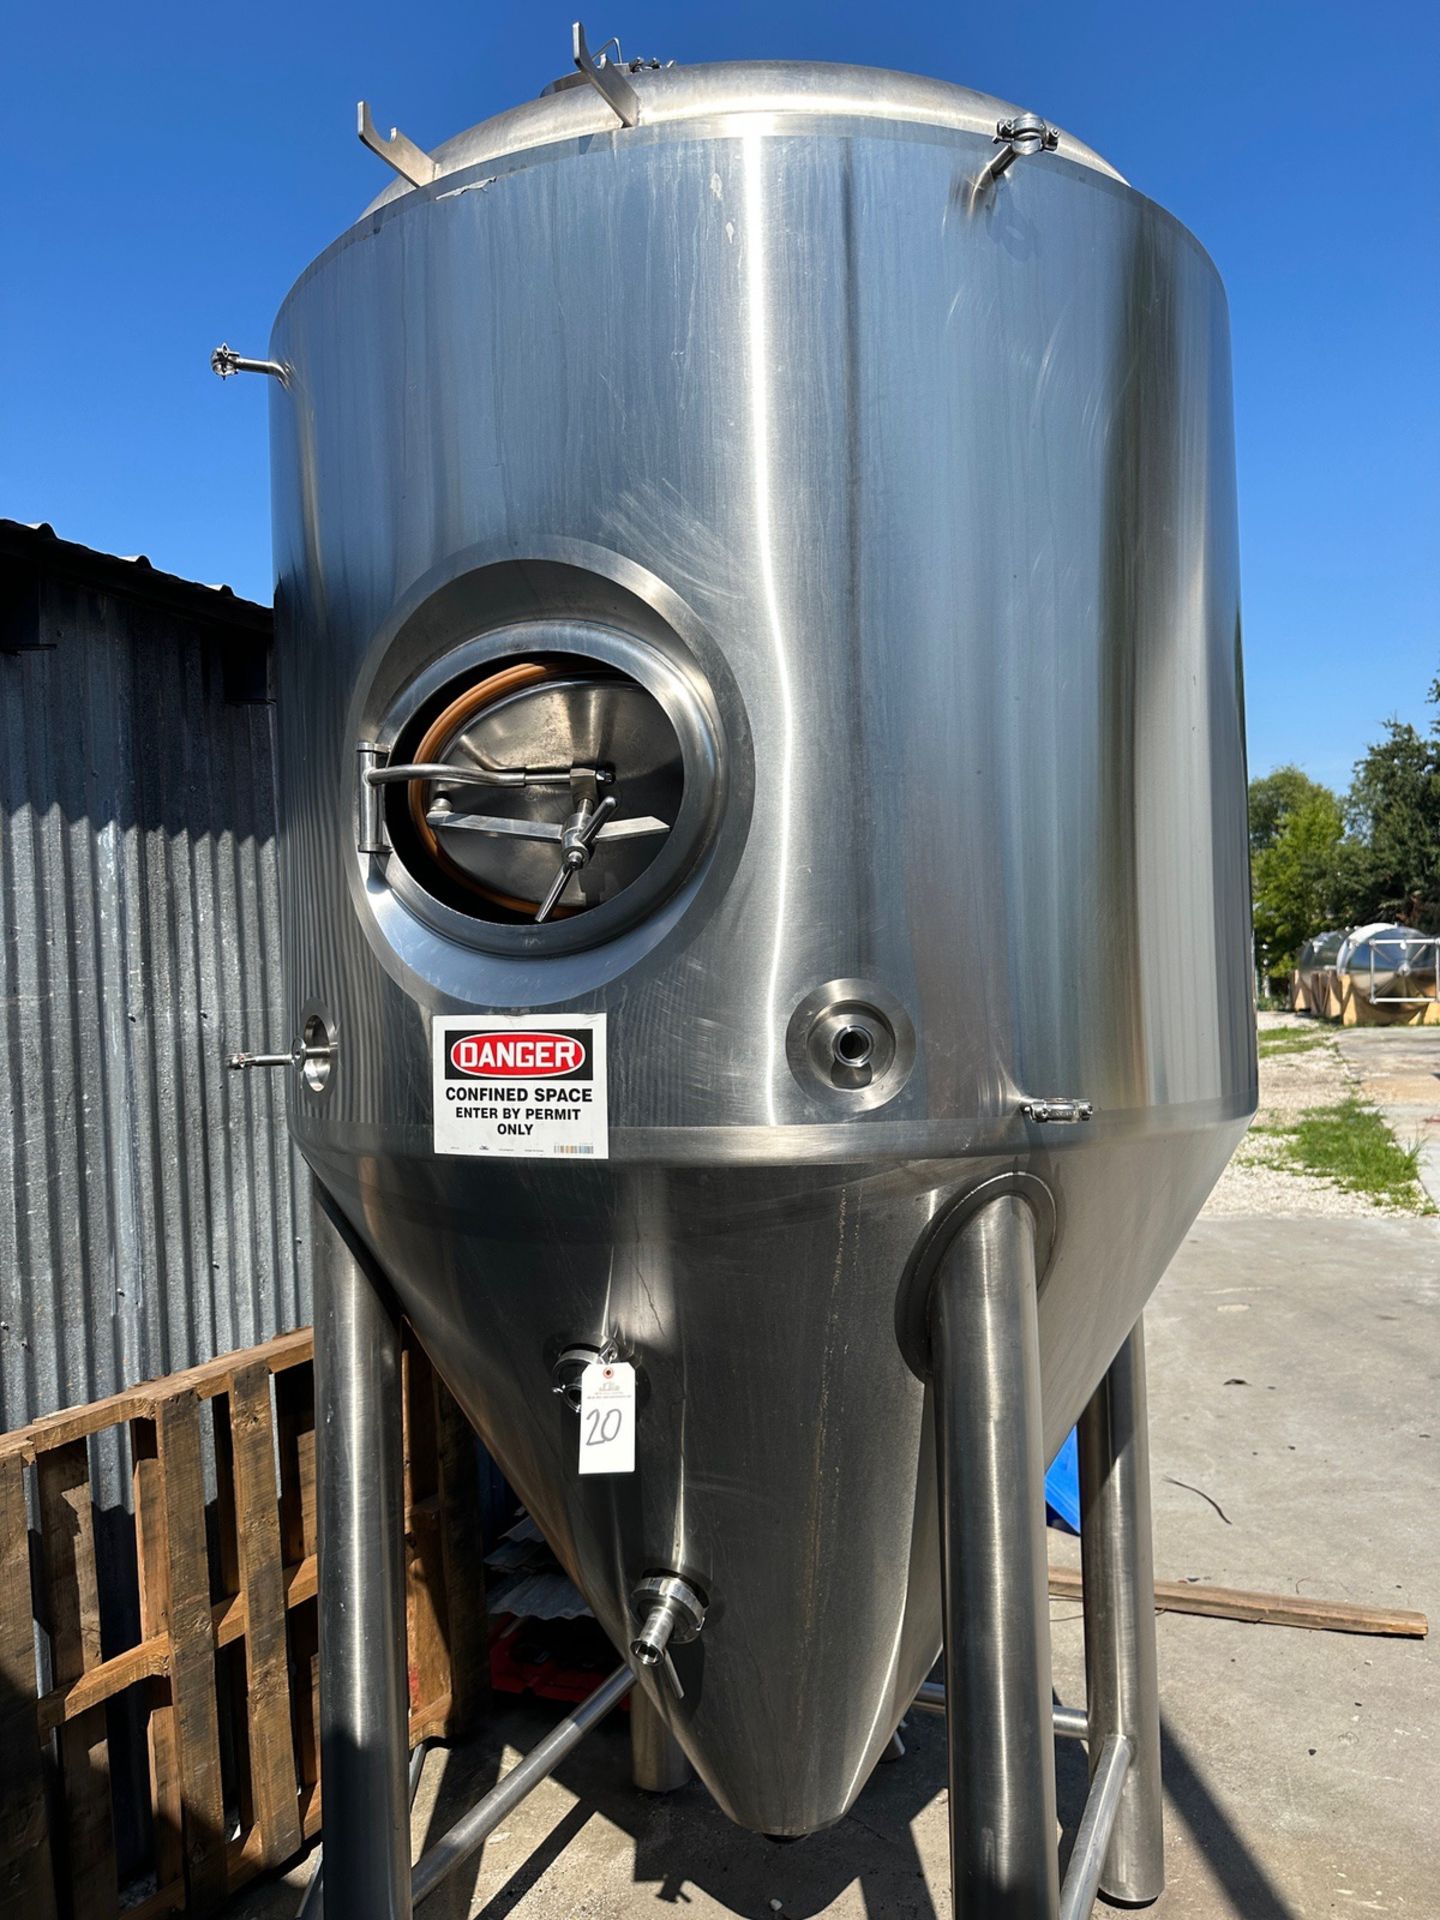 Kettle Craft 20 BBL Stainless Steel Fermentation Tank - Cone Bottom, Glycol Jackete | Rig Fee $350